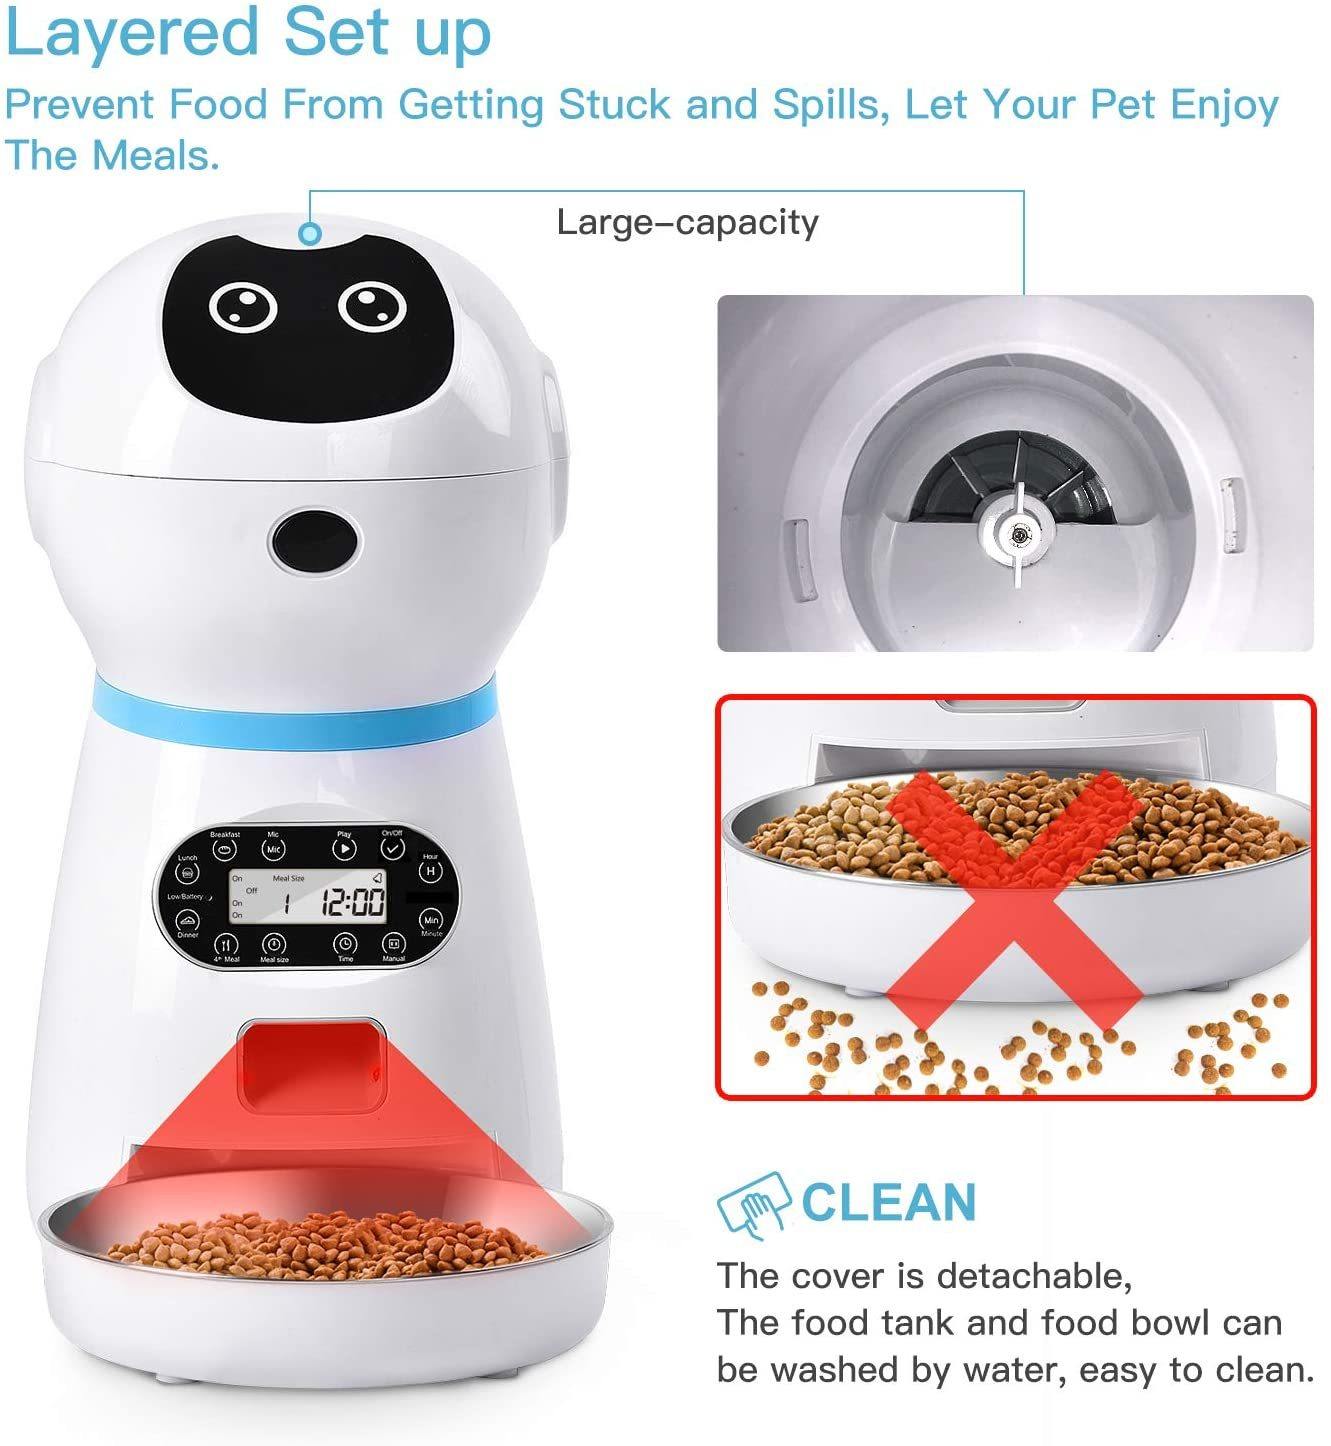 Automatic Robot Pet Feeder with Voice Record